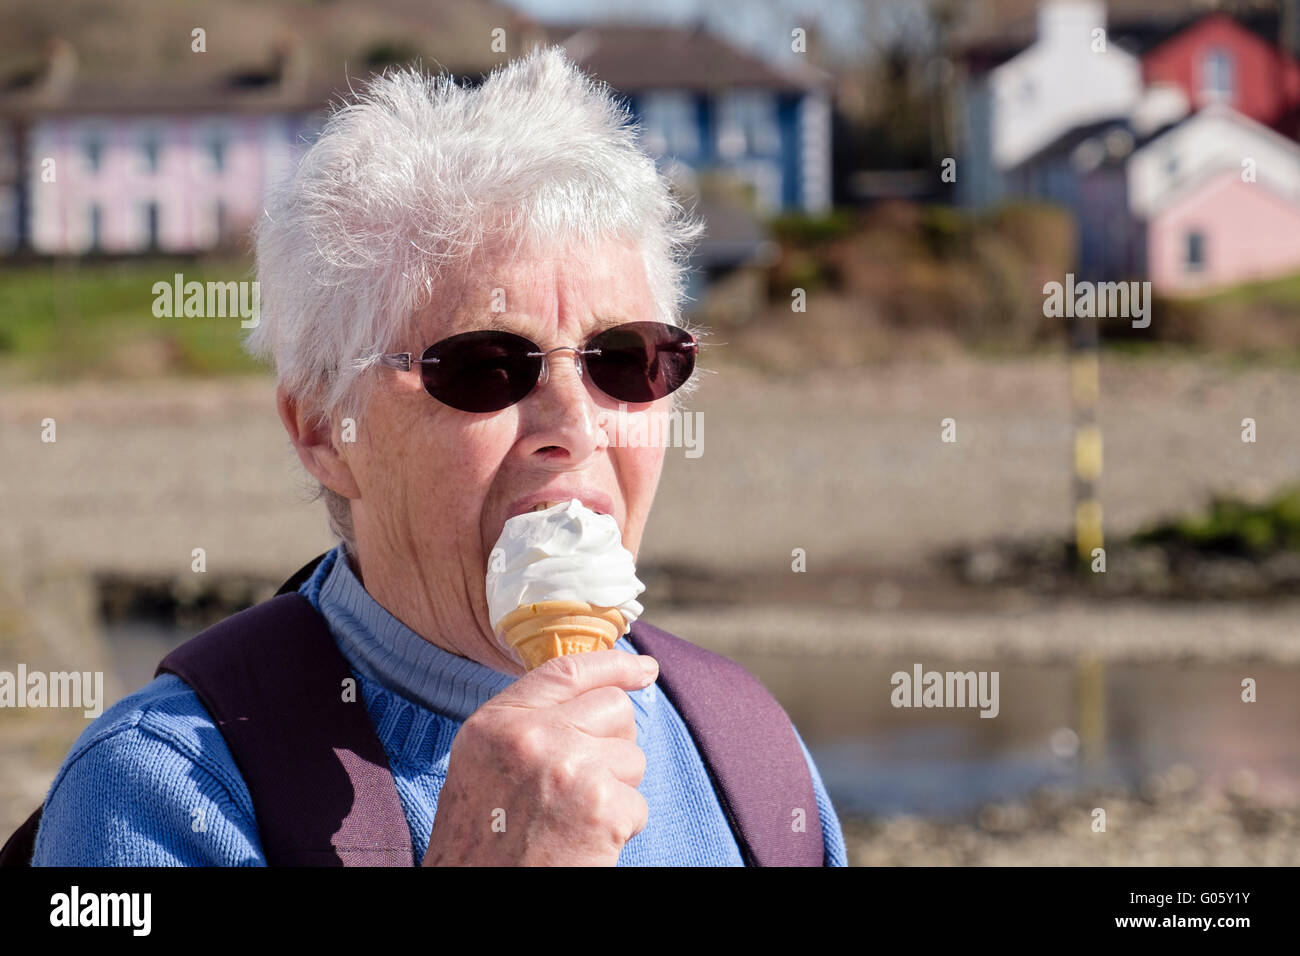 Authentic elderly senior woman older person retiree wearing dark sunglasses and eating an ice cream cone on a summers day. Aberaeron Wales UK Britain Stock Photo